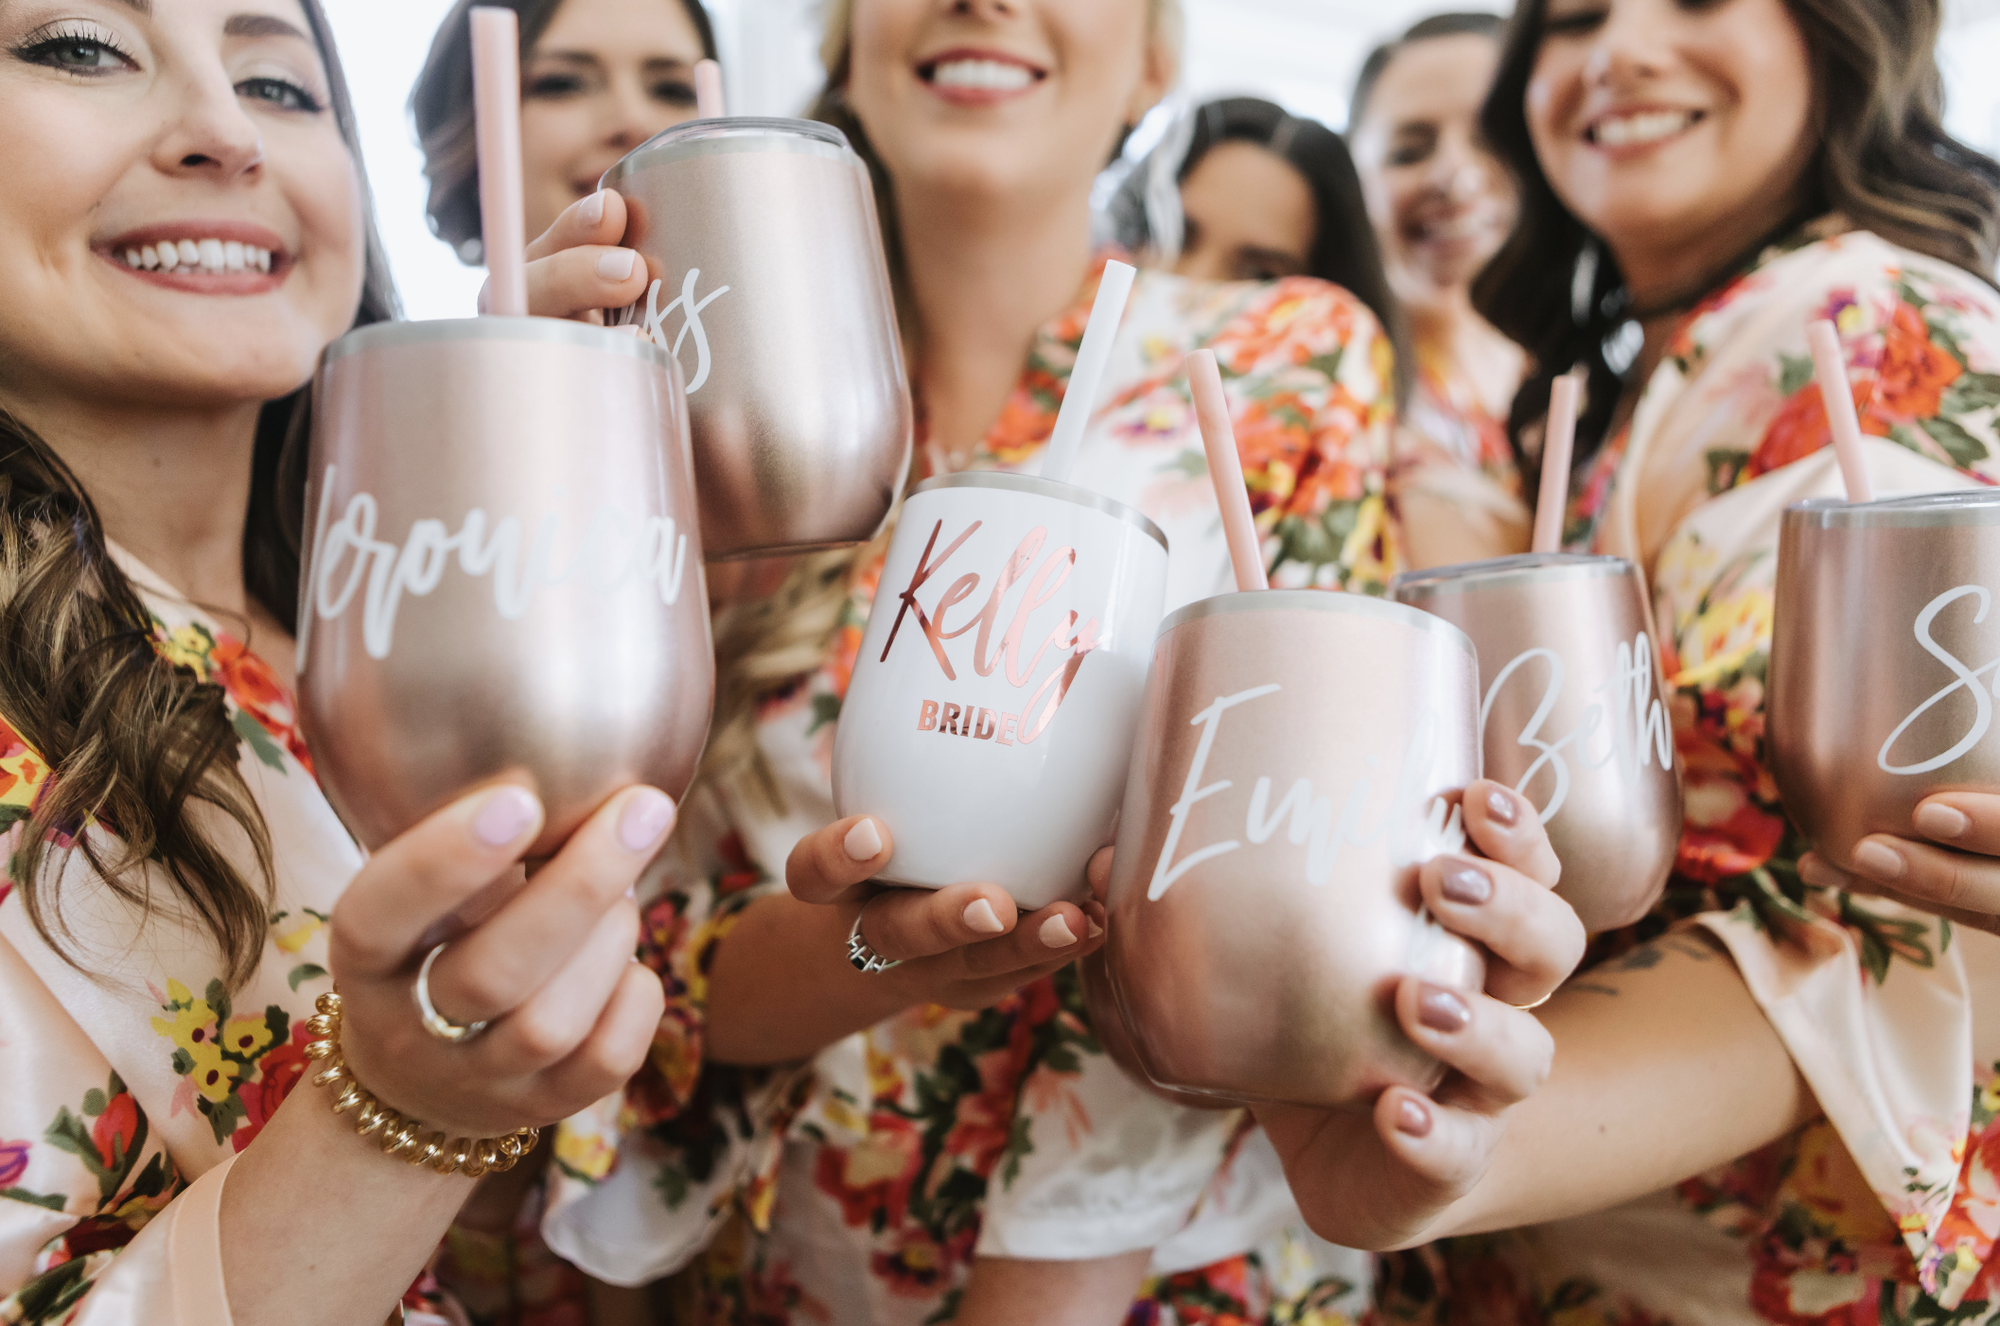 Bridesmaid Cups as Bridal Party Gifts